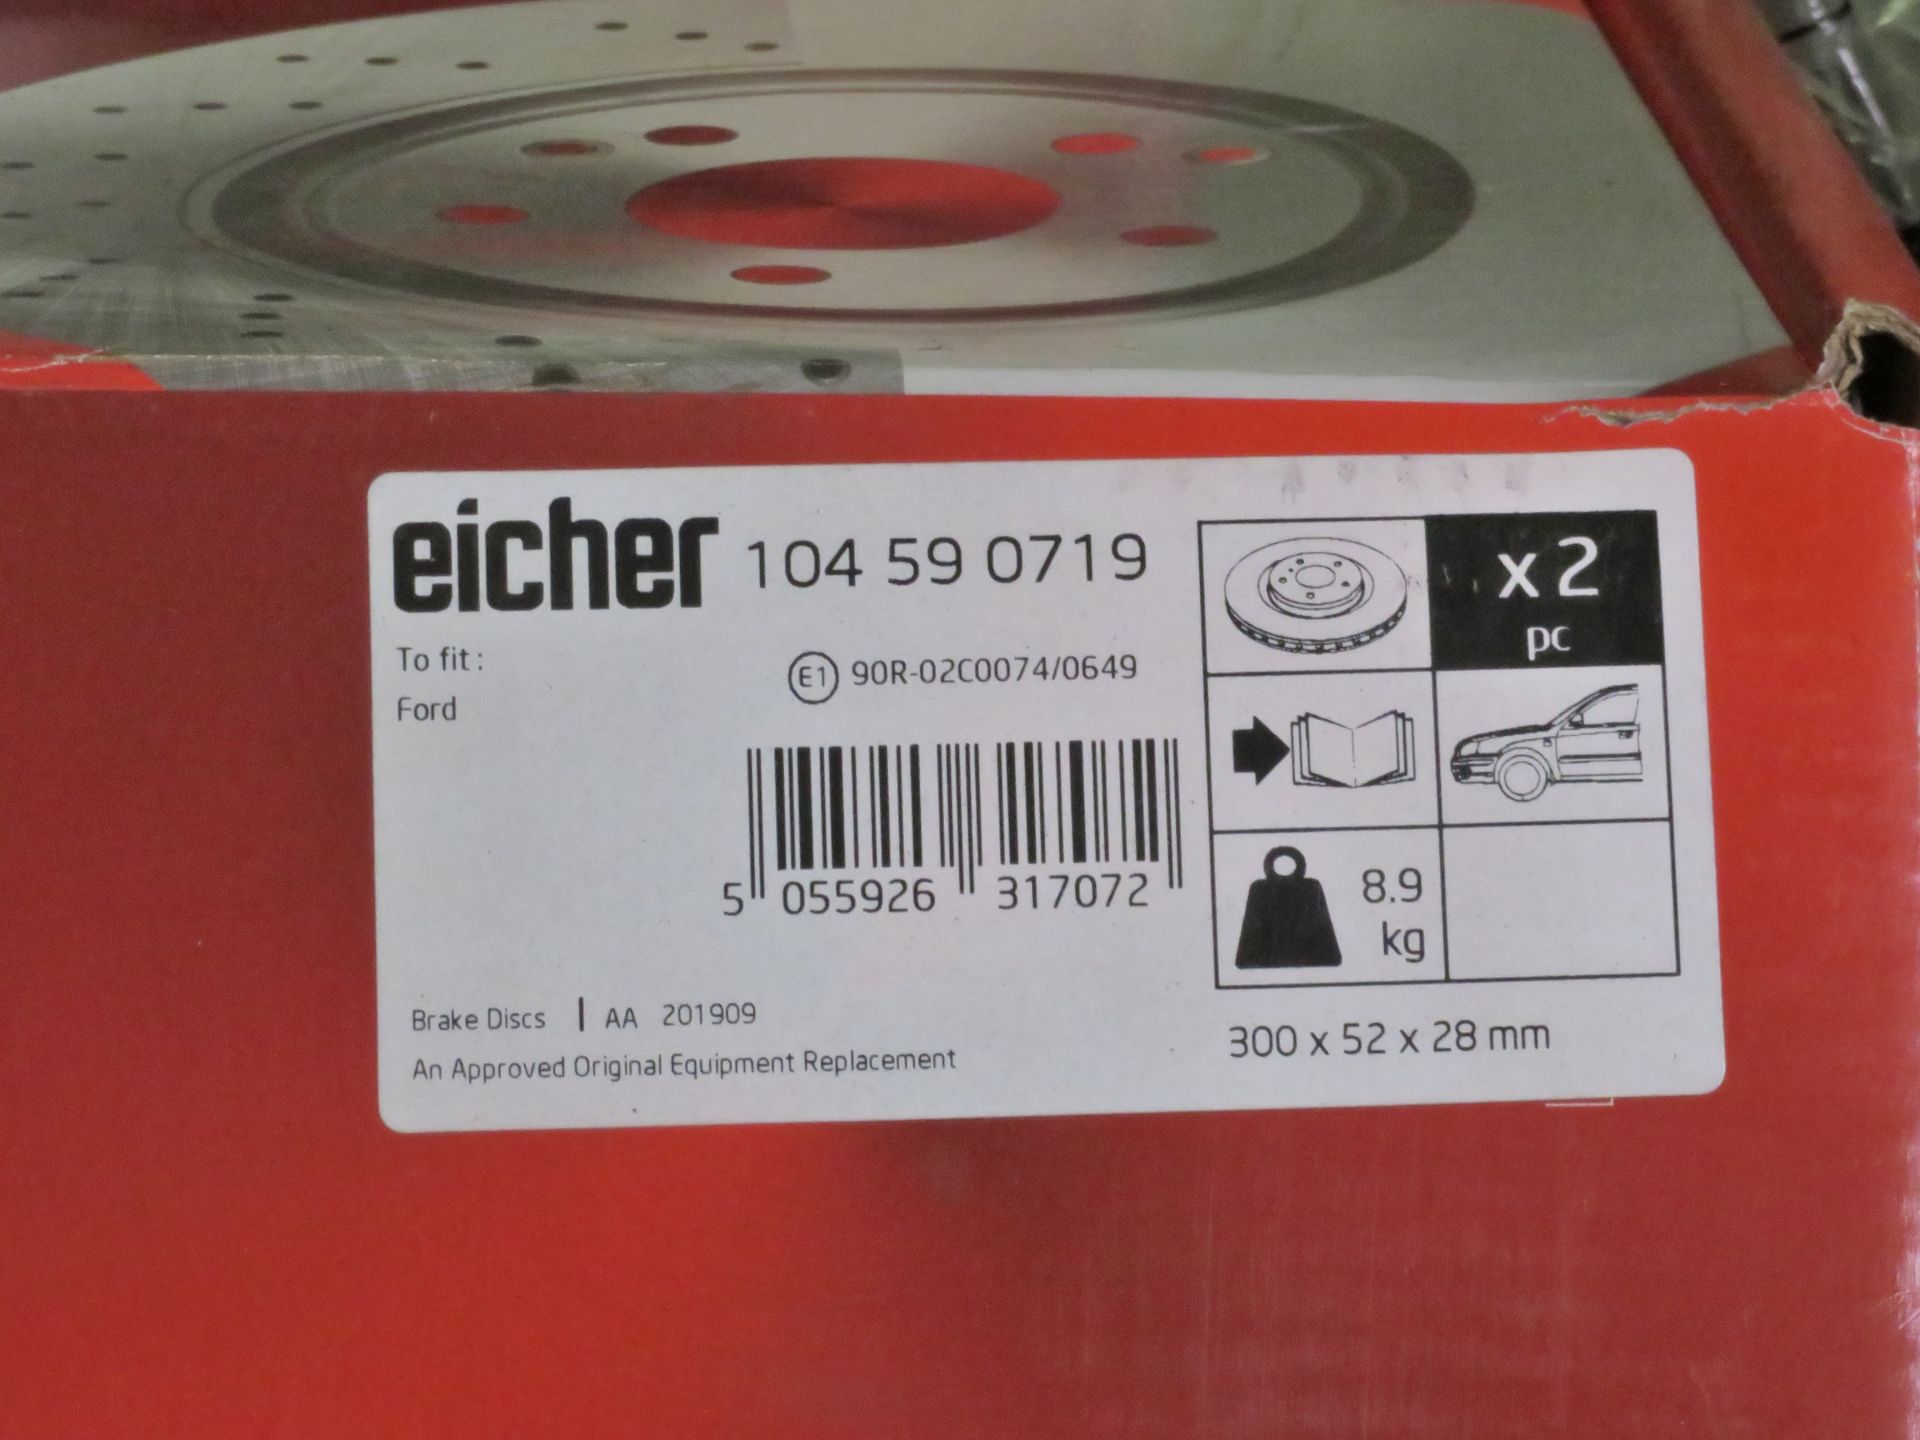 Vehicle parts - Don, Pagid, Eicher, MIntex, Drivemaster brake discs - see picture for itin - Image 3 of 4